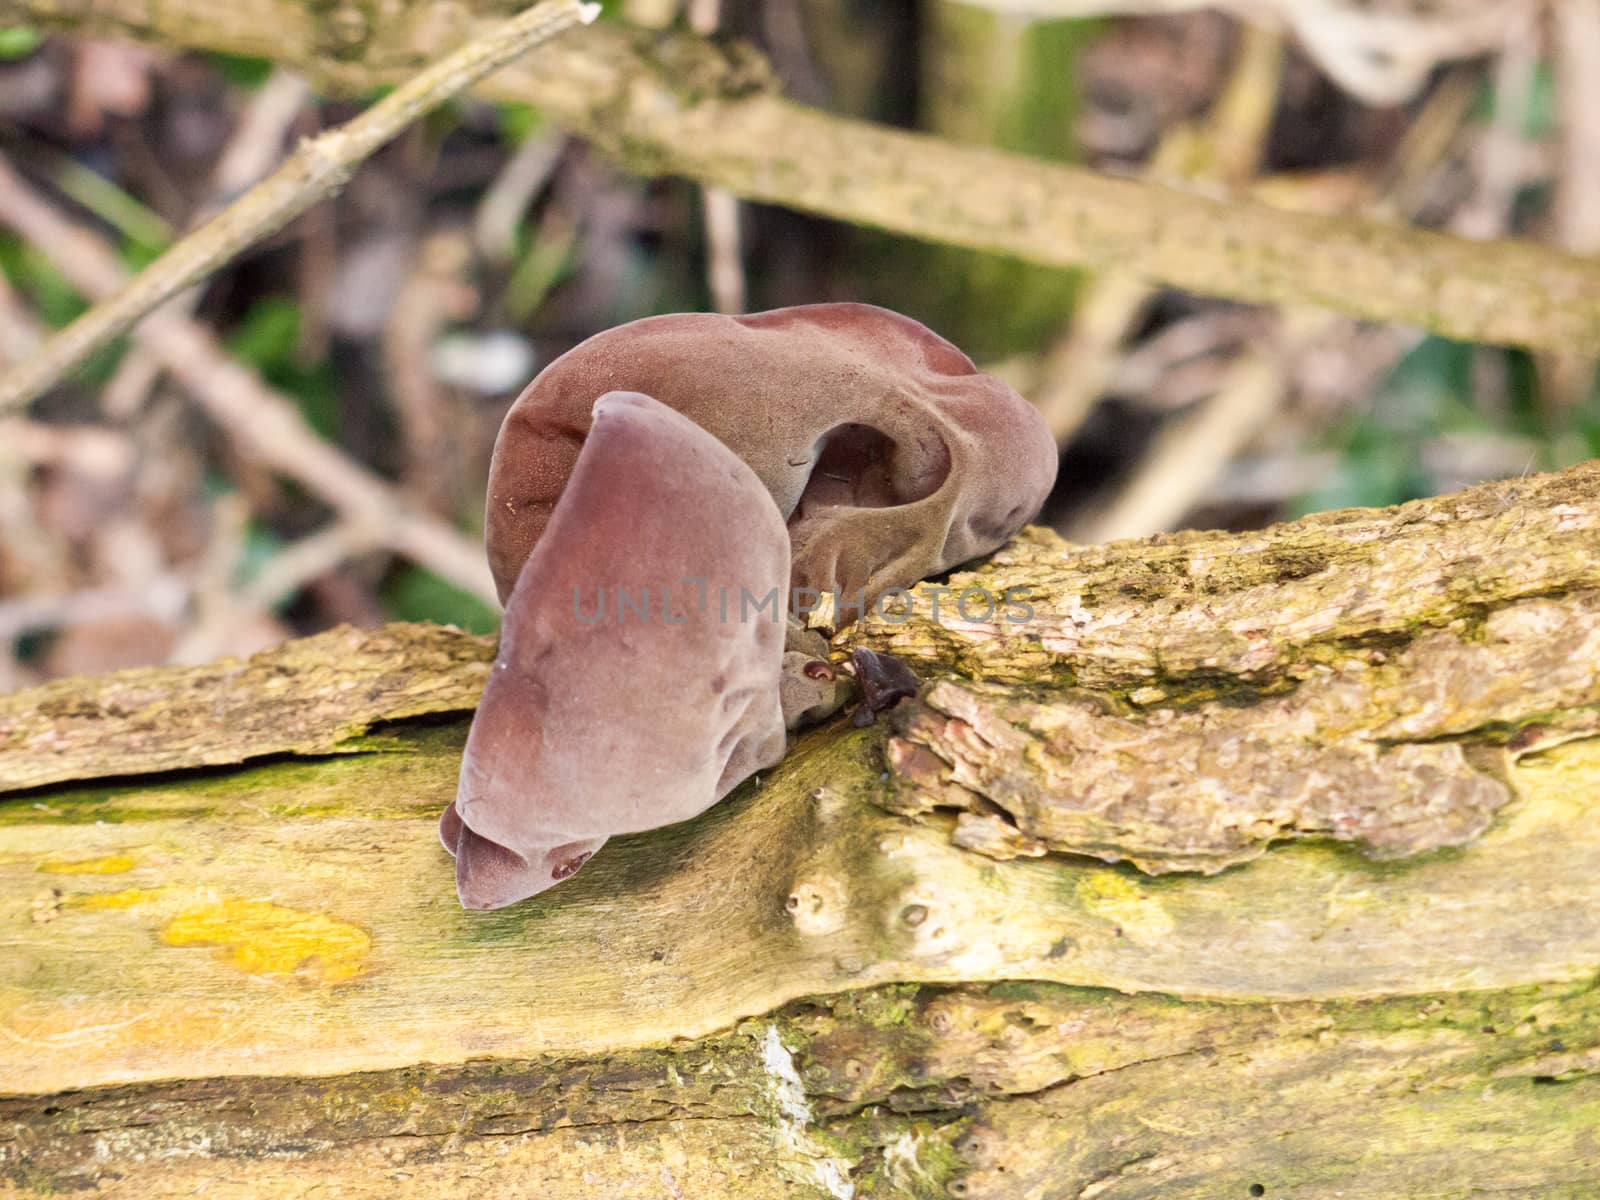 close up of growing hanging jelly jew ears tree elder - Auricularia auricula-judae (Bull.) Wettst. - Jelly Ear Fungus by callumrc